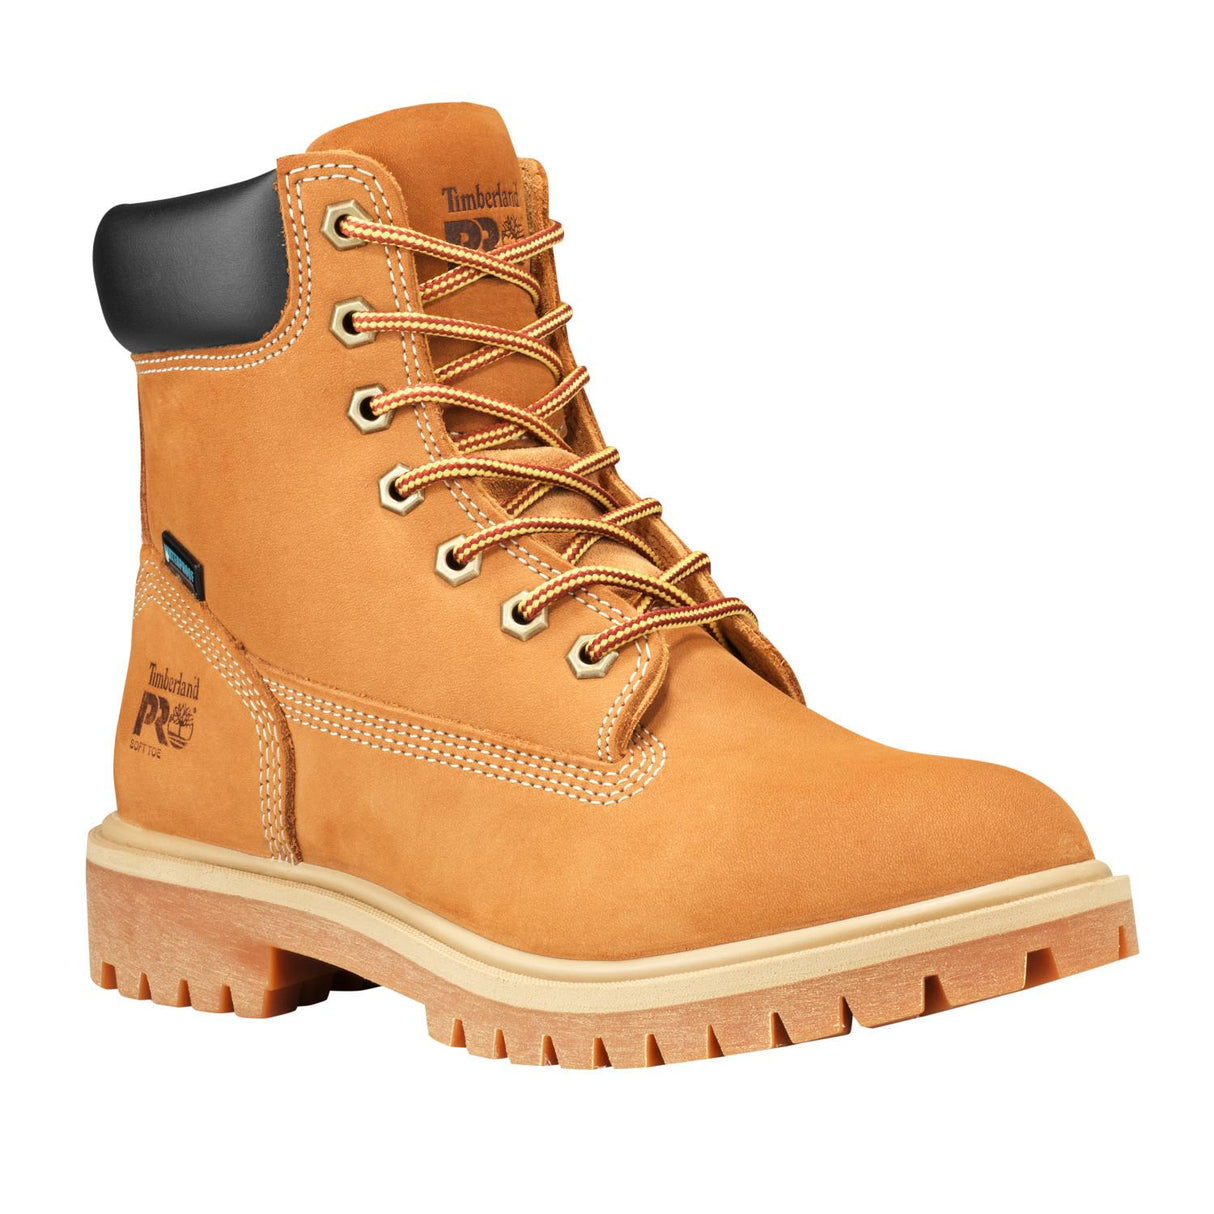 Timberland Pro-Women's 6 In Direct Attach Waterproof Ins 200G Wheat-Steel Toes-10